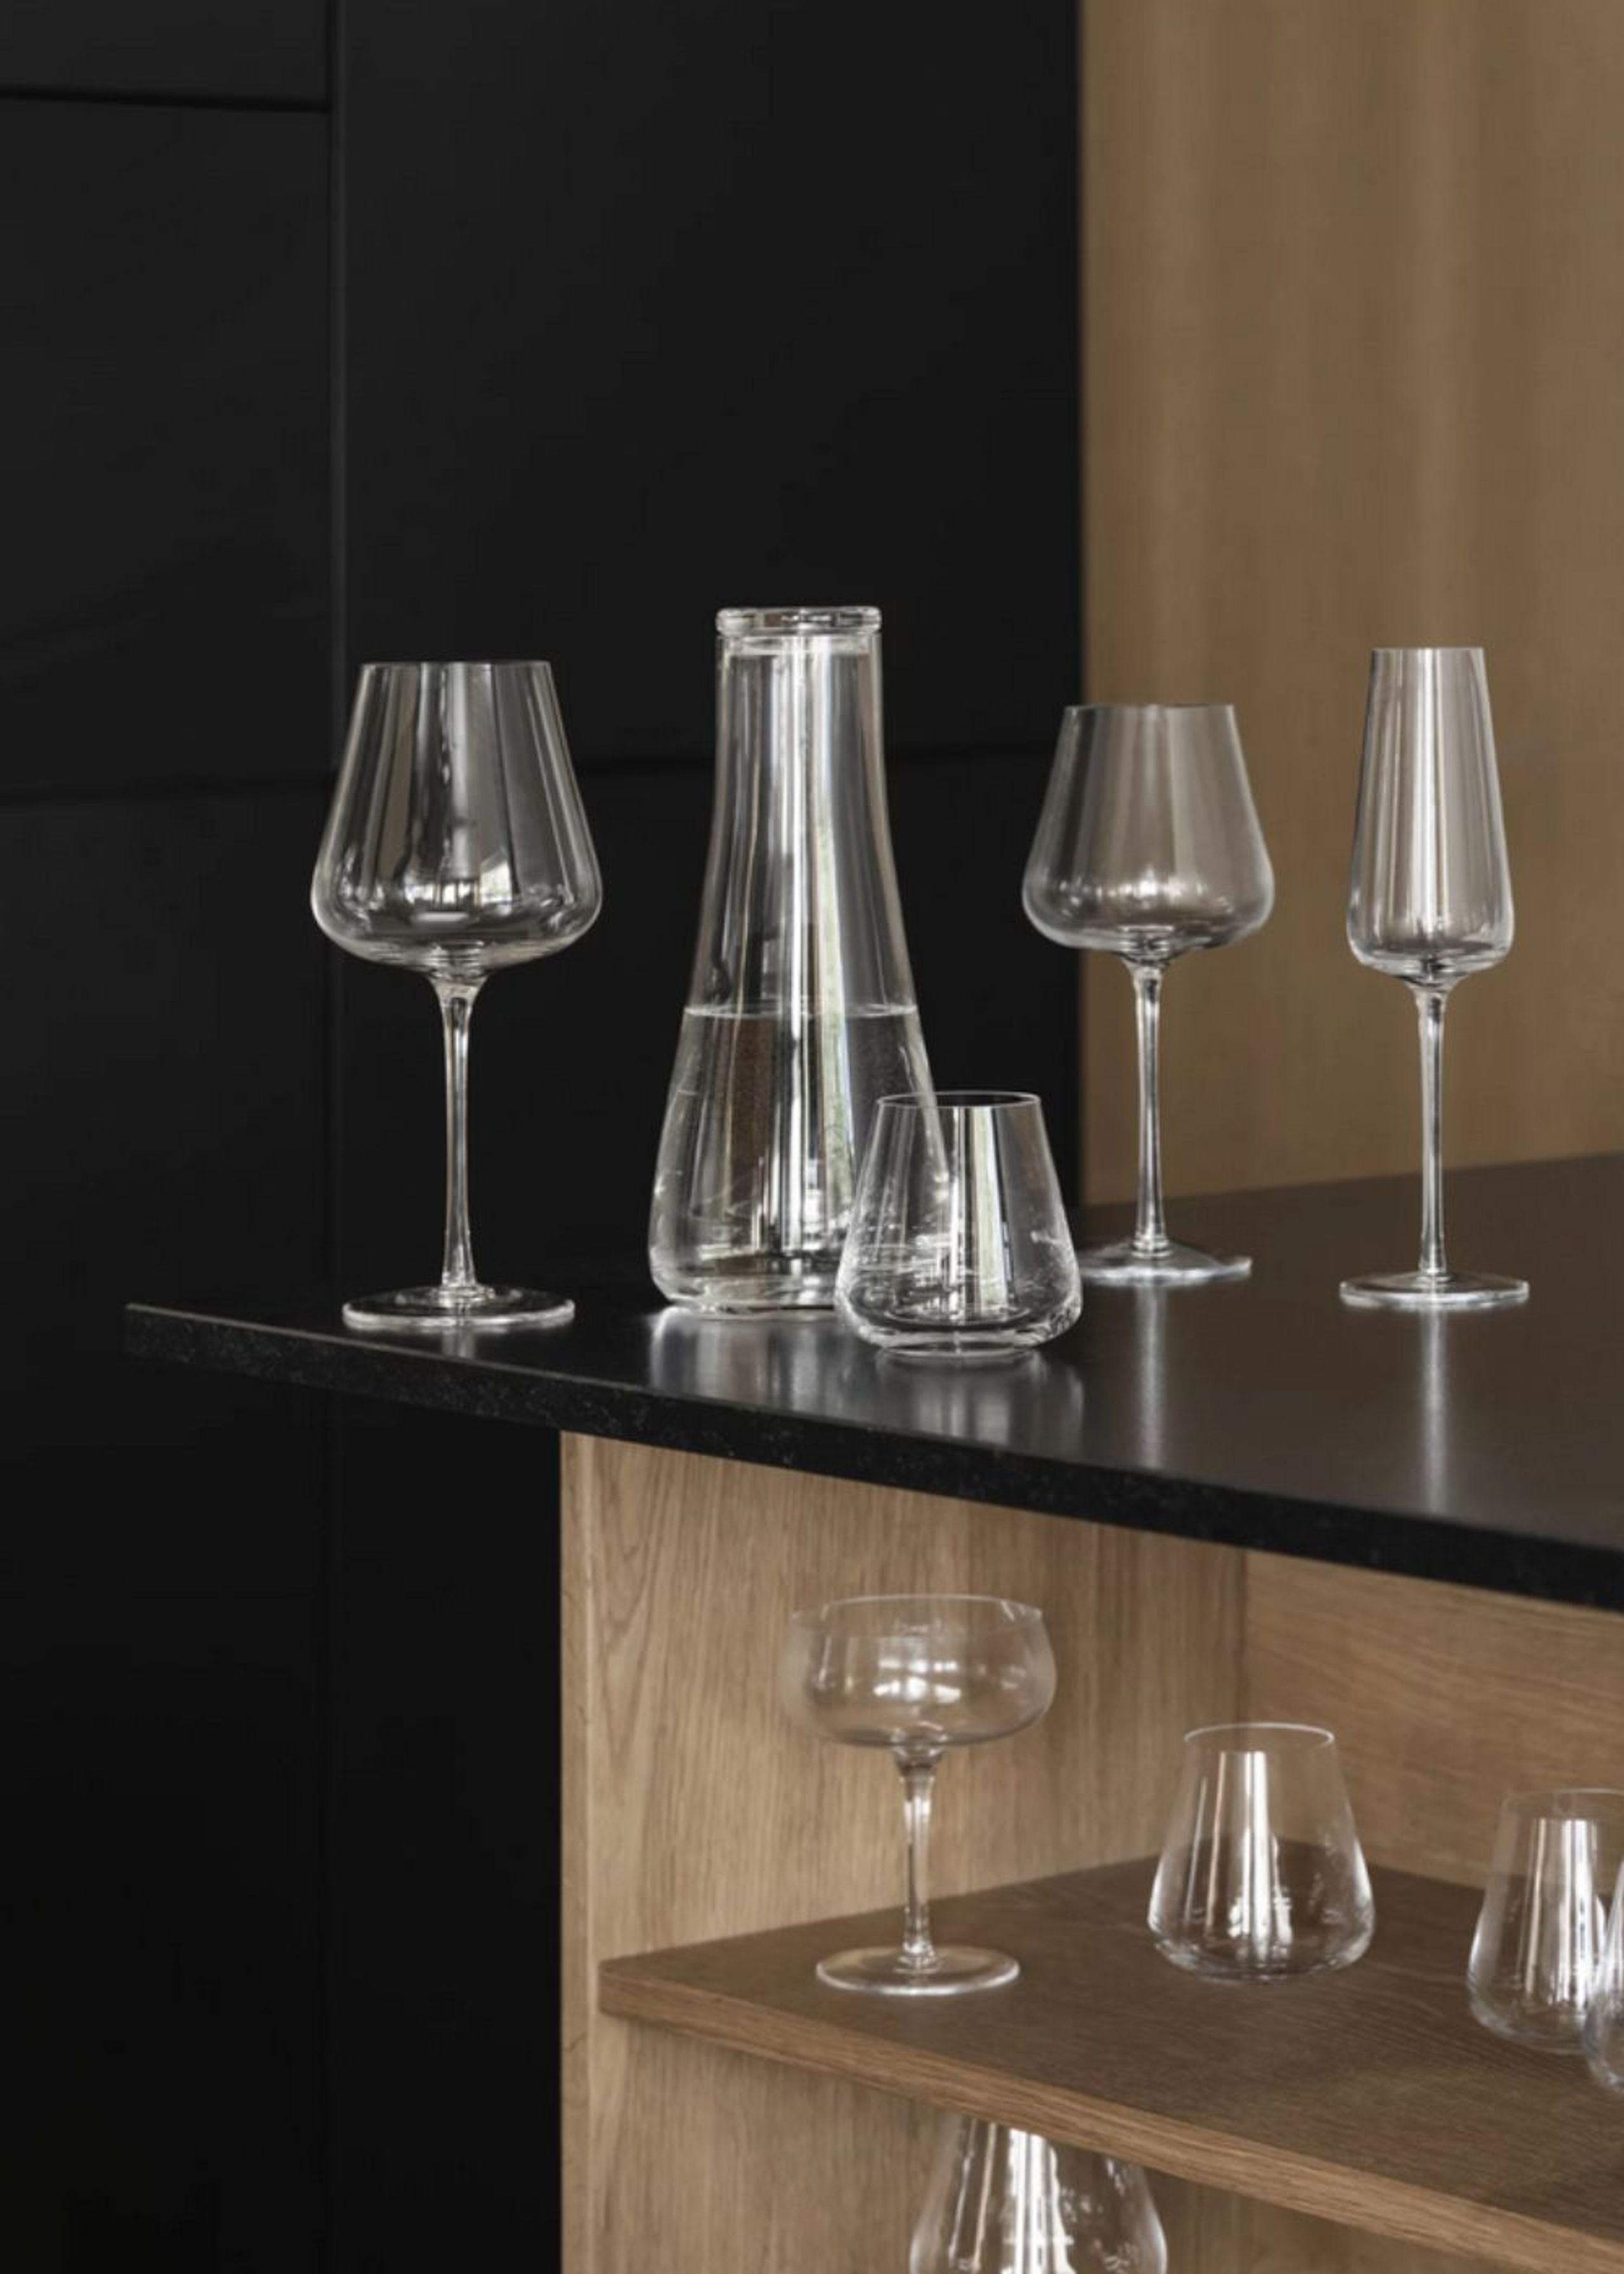 Blomus - Champagneglas - Set Of 6 Champagne Glasses - Tall - Belo Clear - Clear